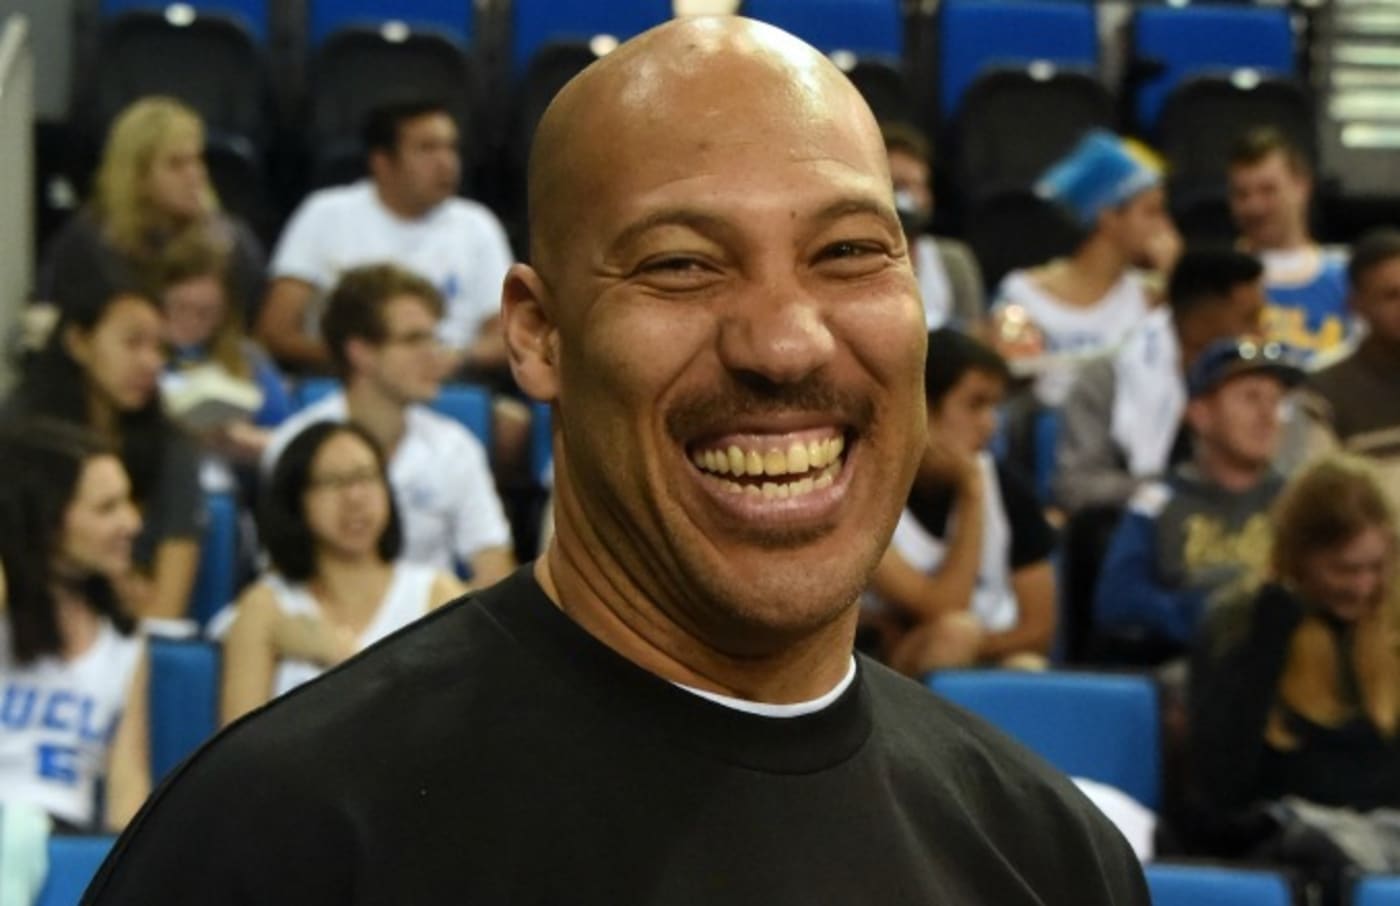 LaVar Ball smiles at a UCLA game.